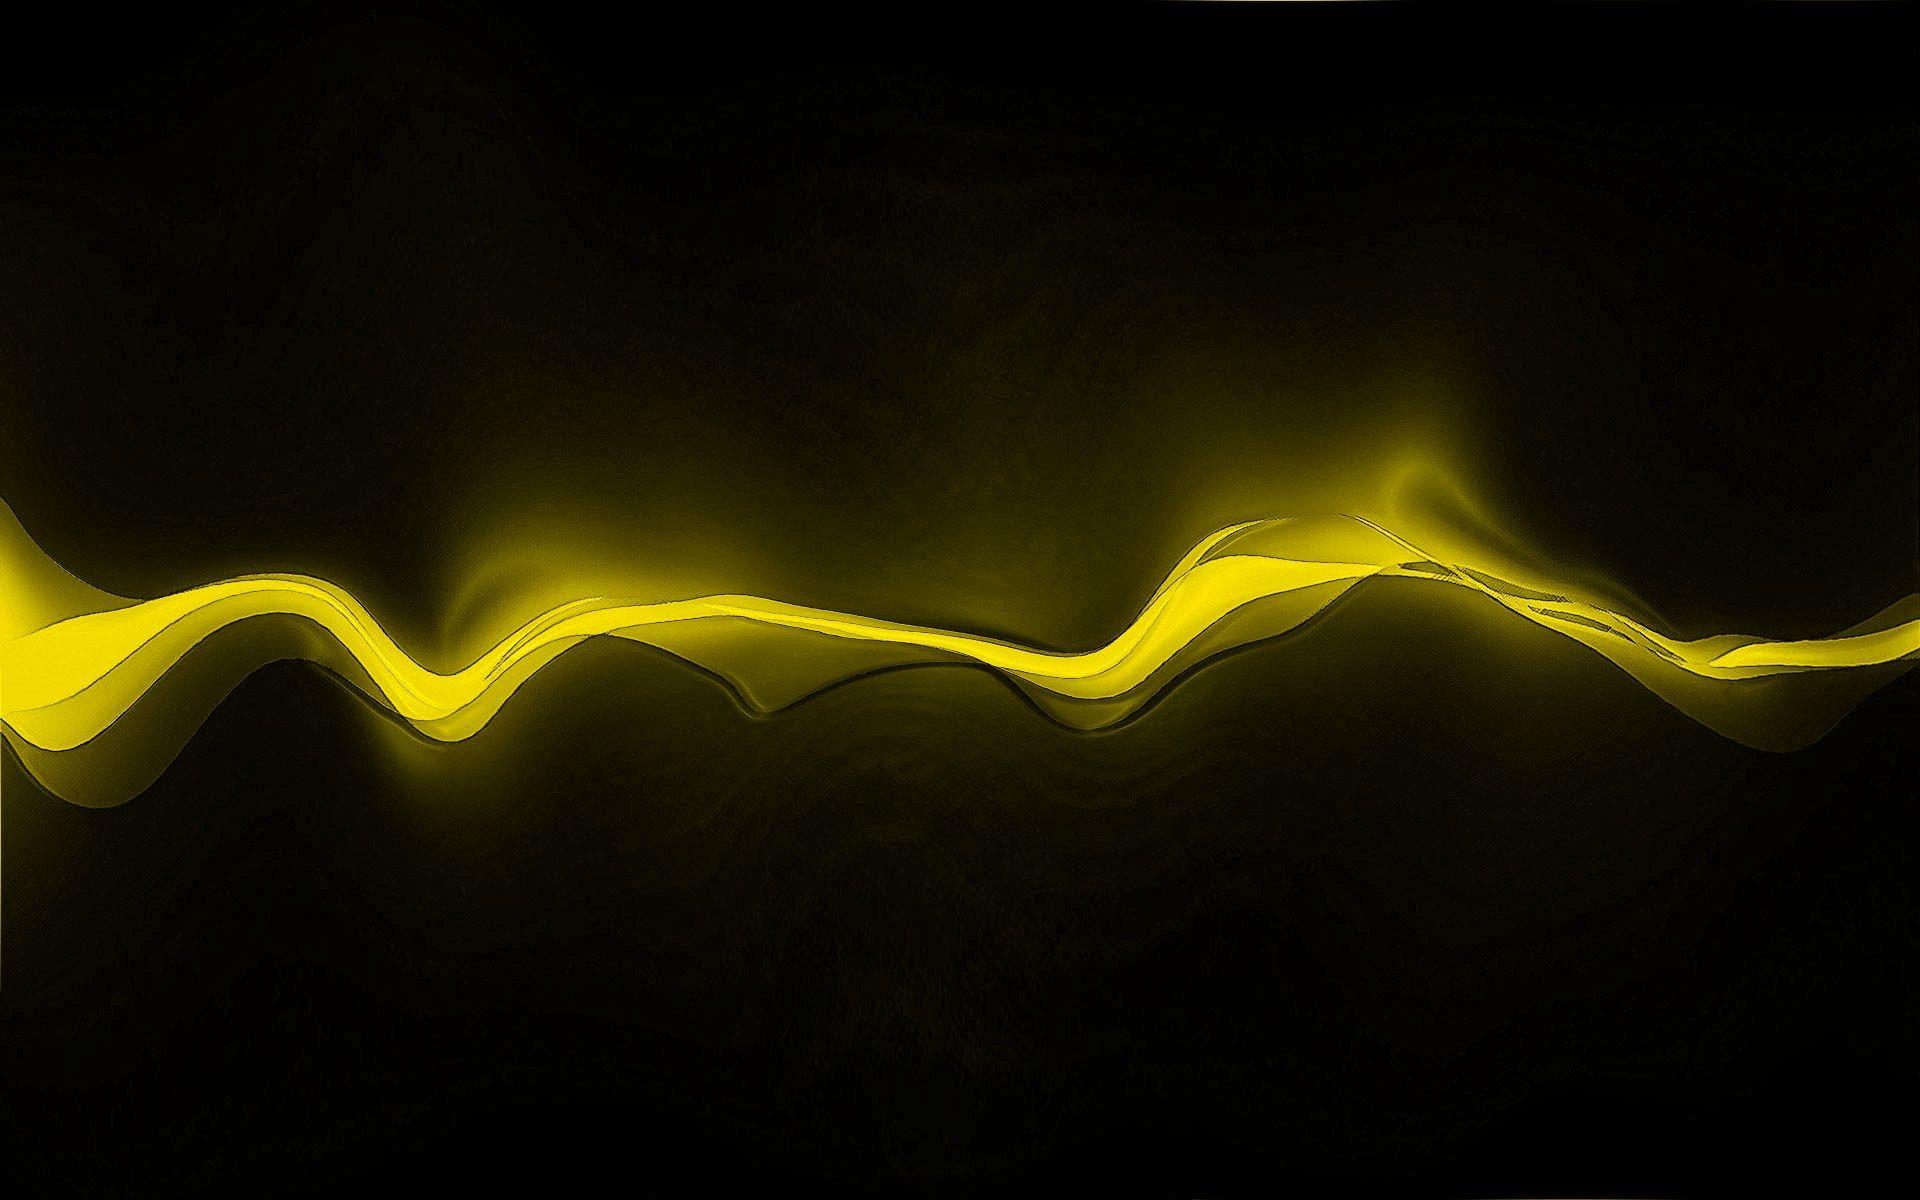 Black and Yellow Abstract Wallpapers - Top Free Black and Yellow Abstract Backgrounds